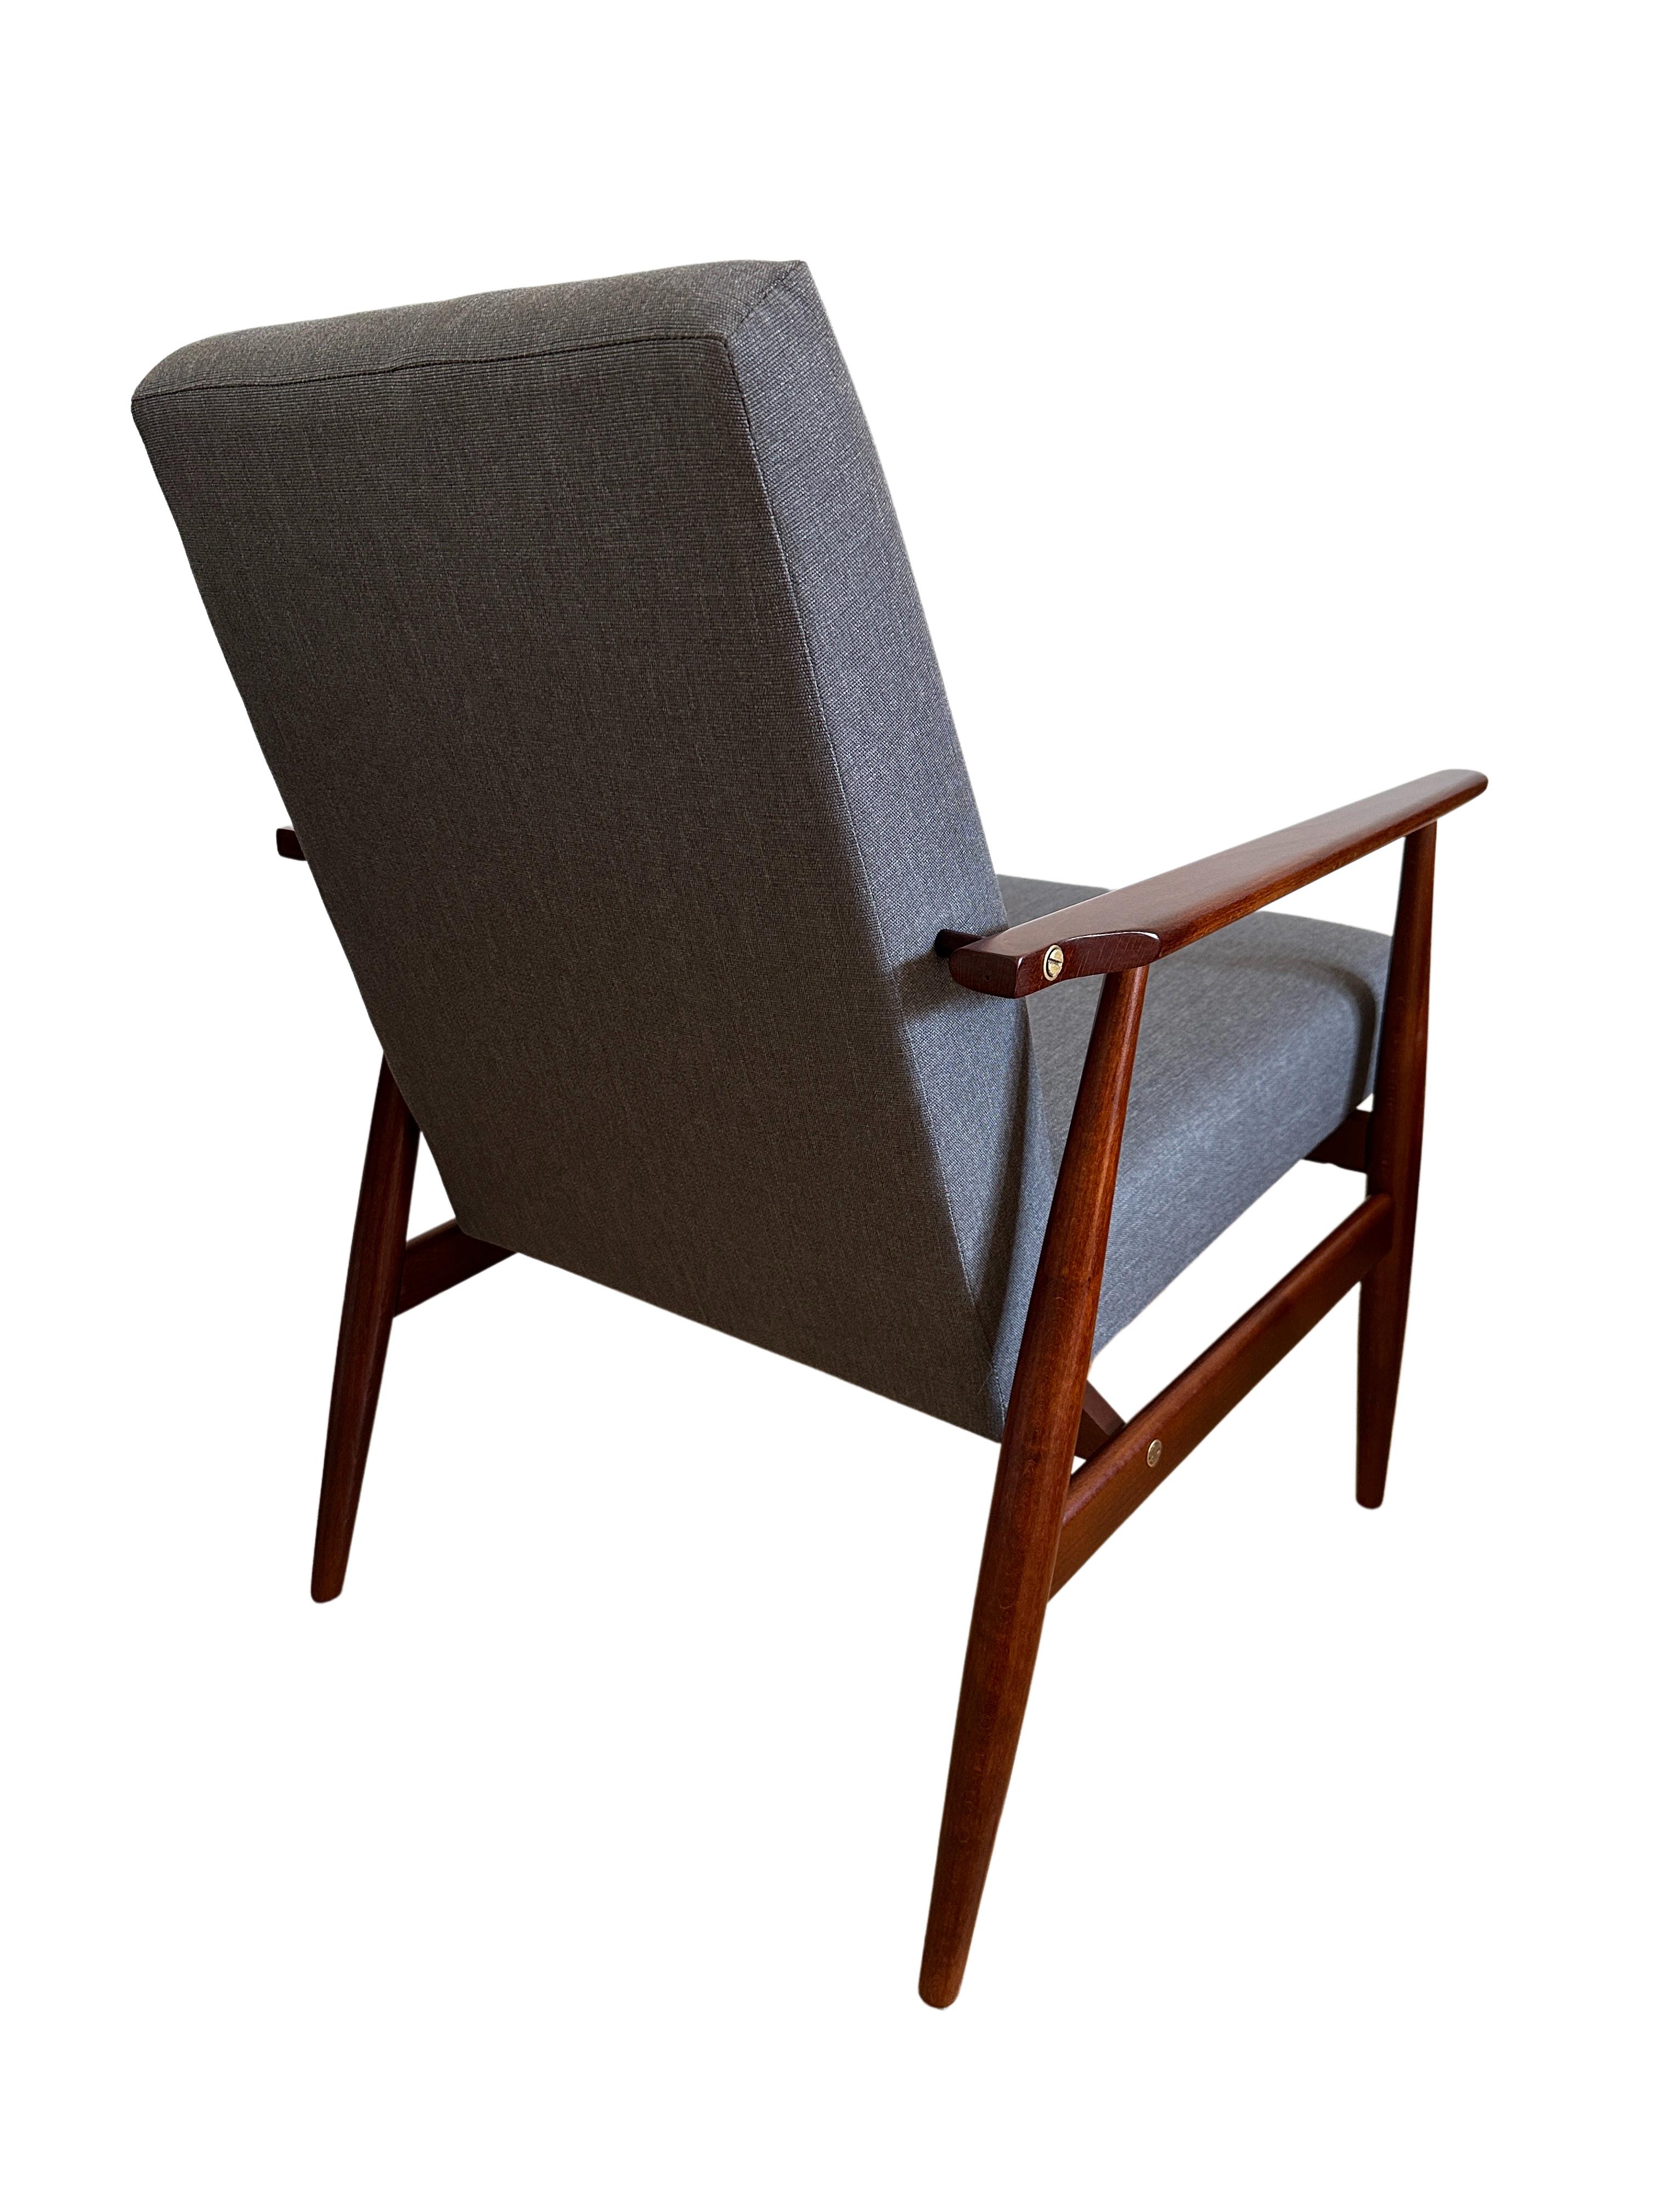 Polish Midcentury Armchair in Kvadrat Upholstery by Henryk Lis, Europe, 1960s For Sale